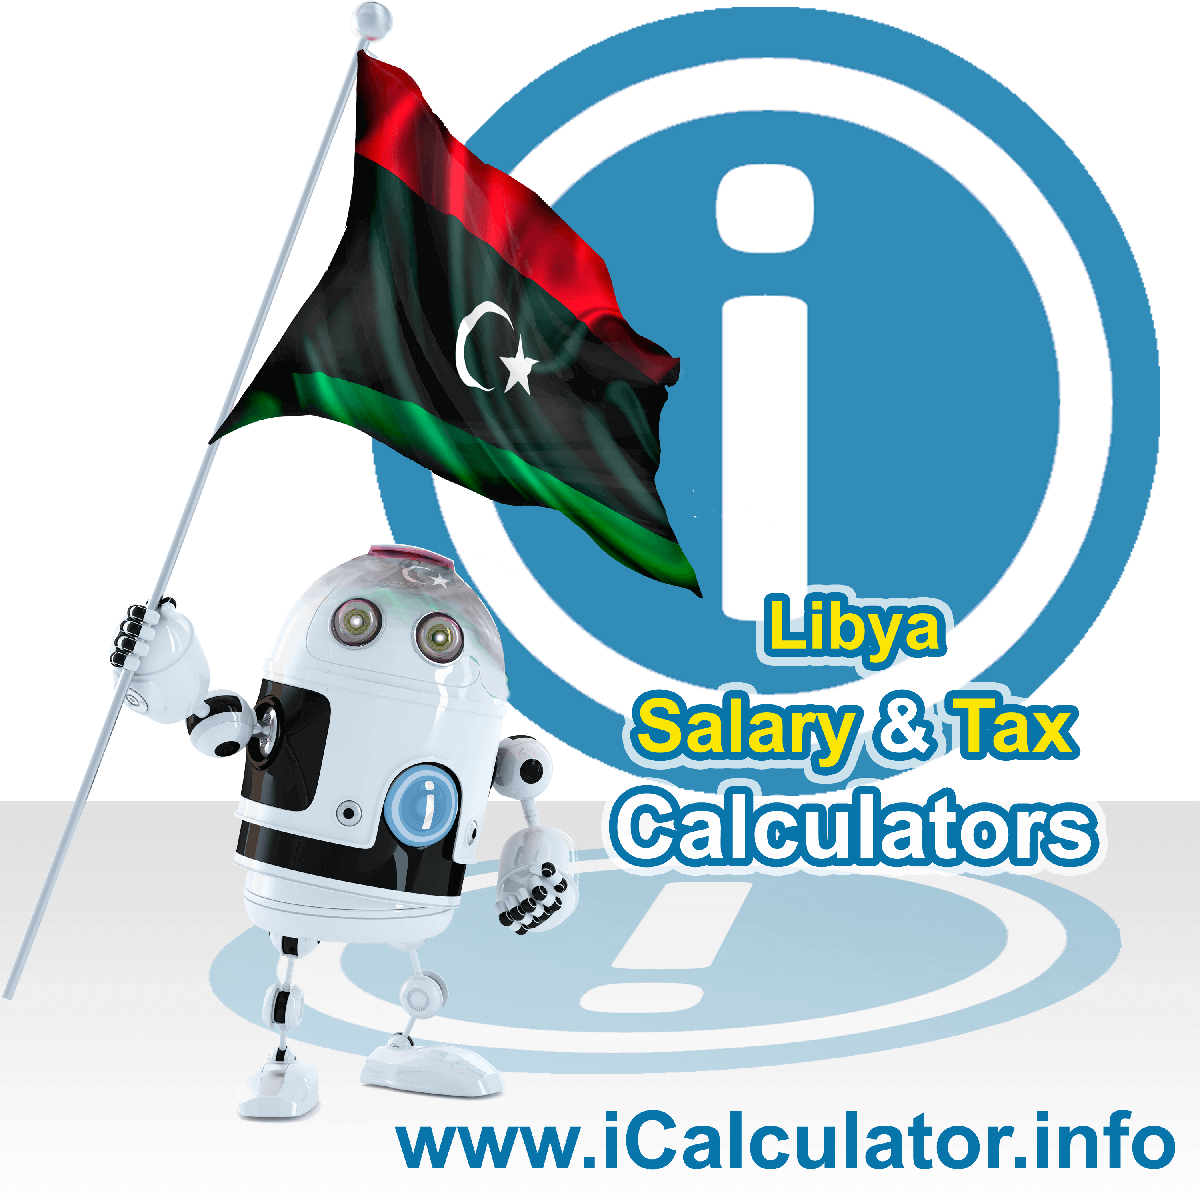 Libya Tax Calculator. This image shows the Libya flag and information relating to the tax formula for the Libya Salary Calculator